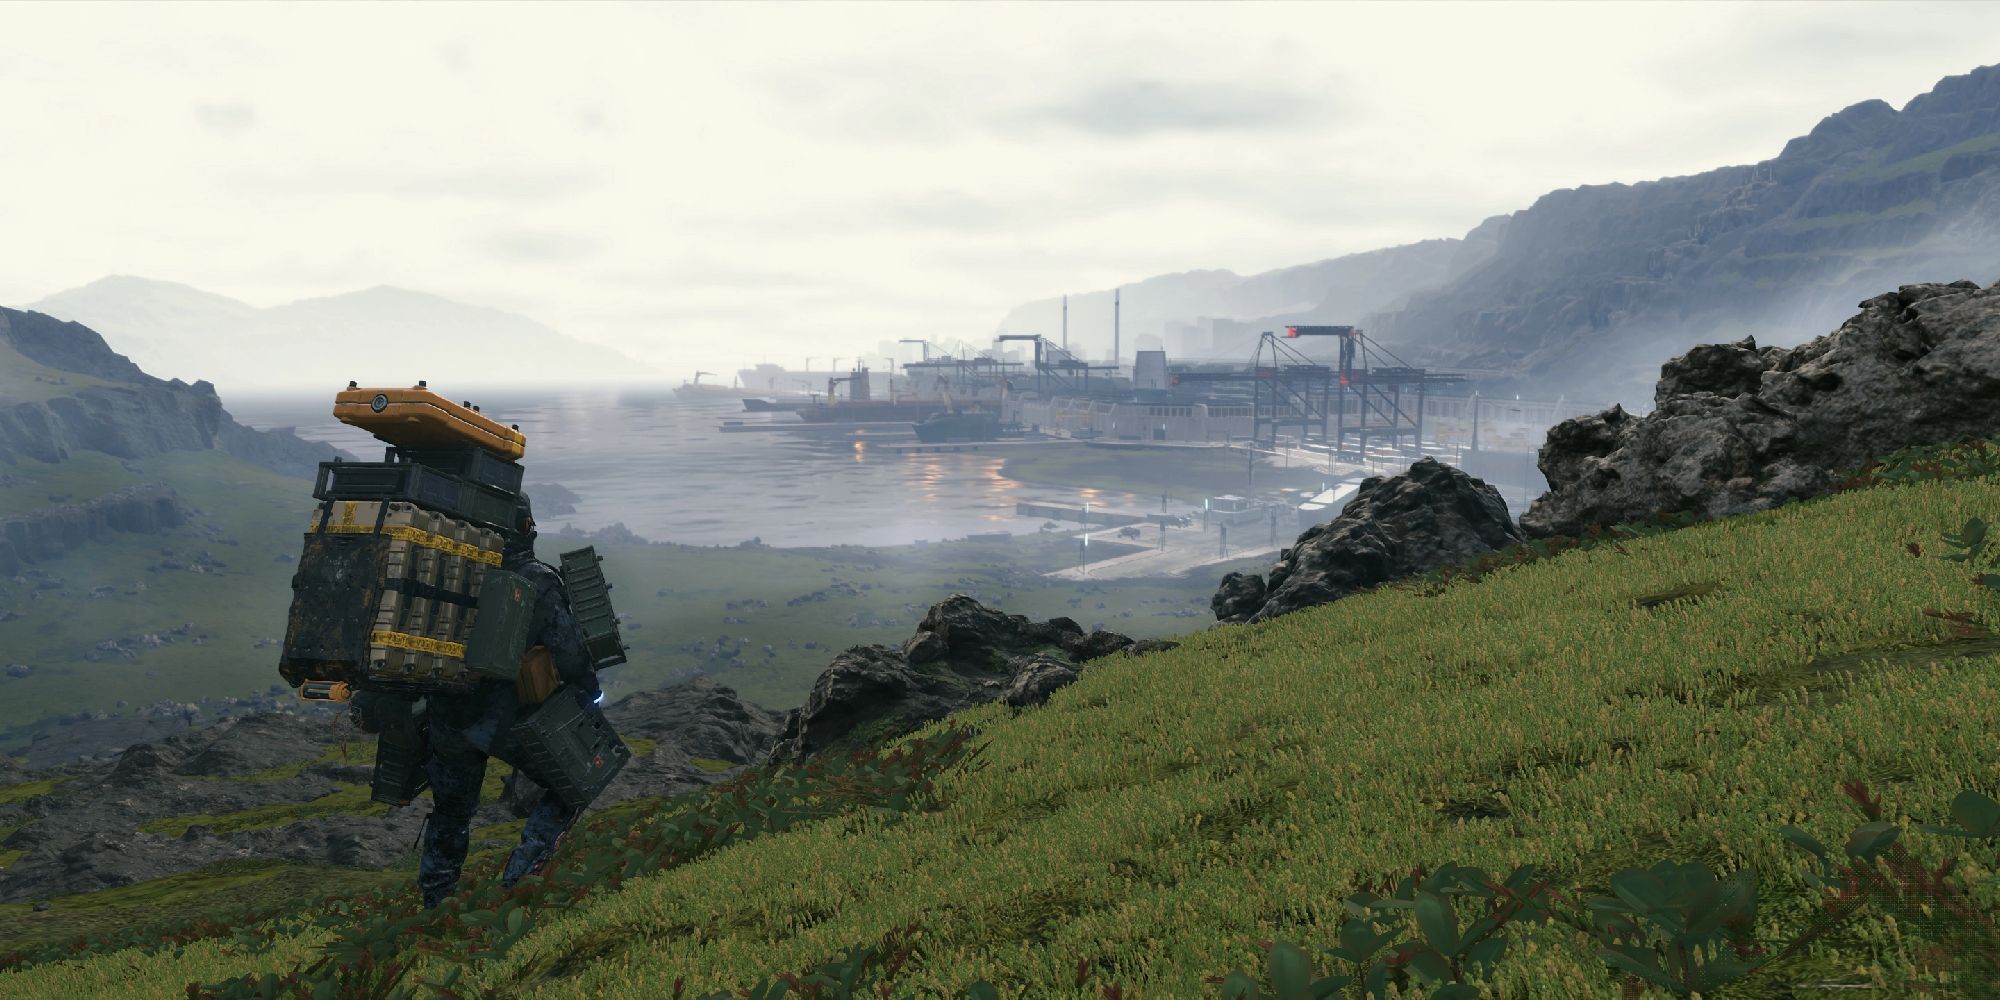 The protagonist stands on a grassy hill overlooking a structure in the distance. 